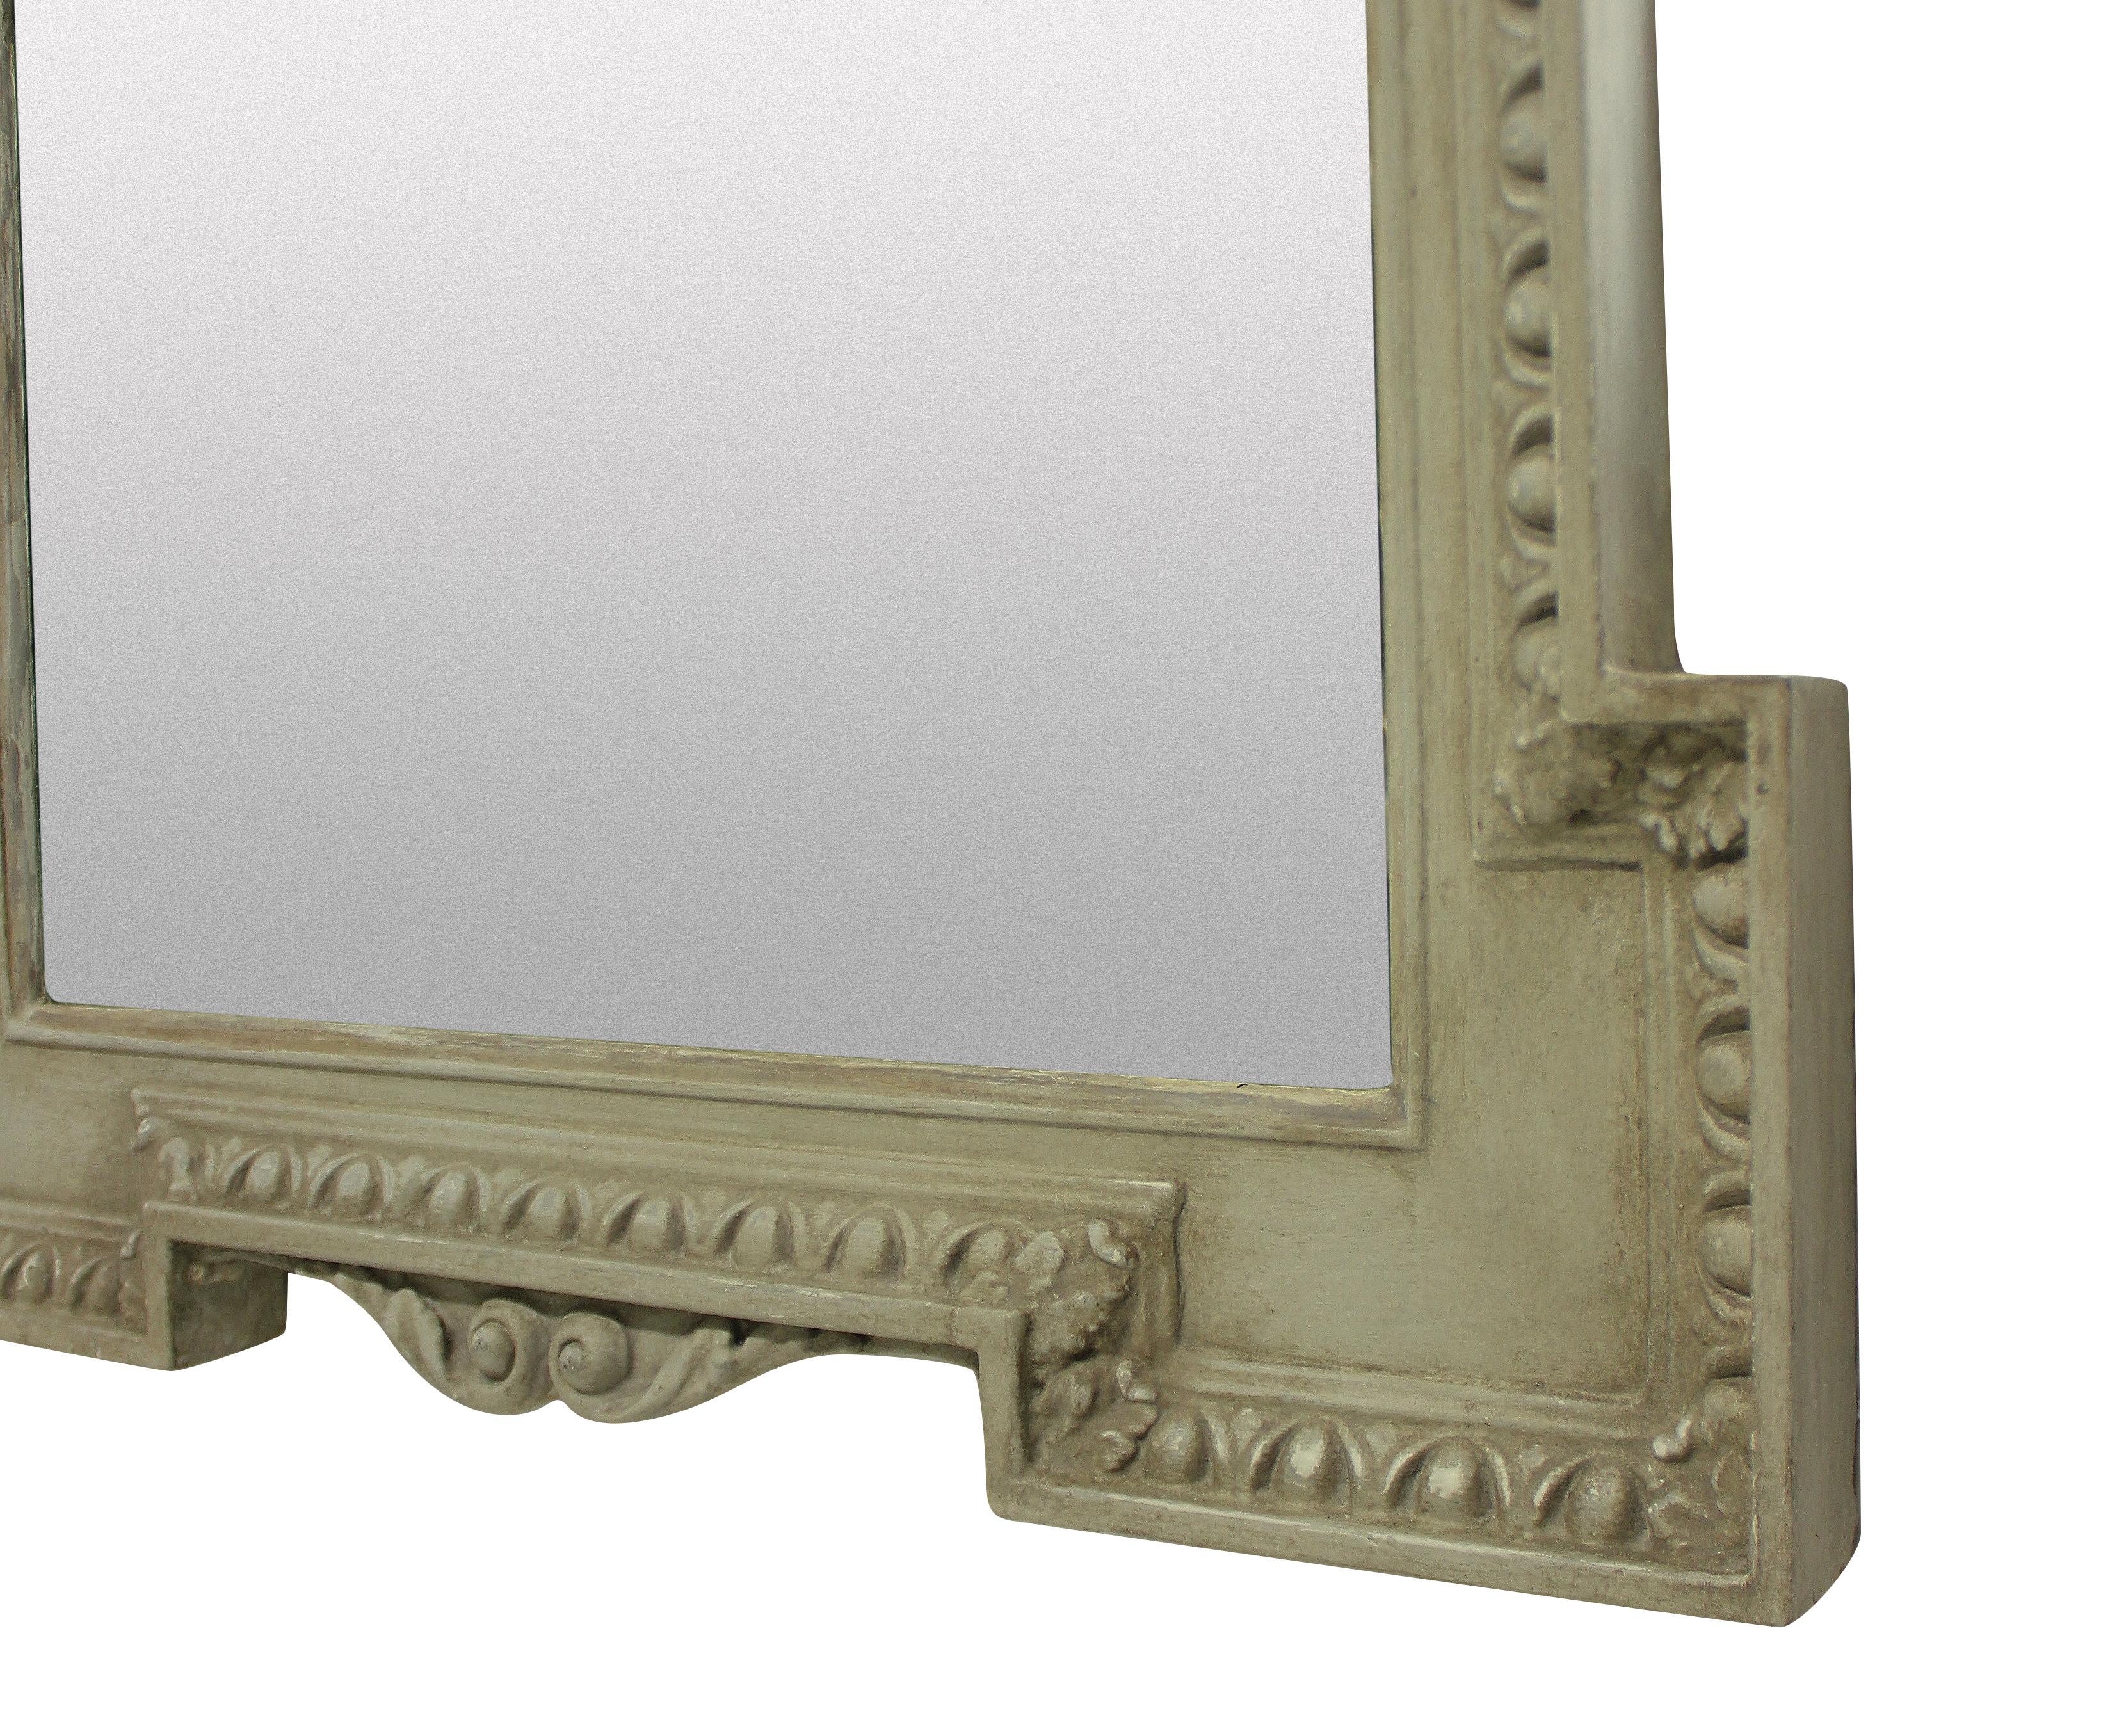 An English carved and painted mirror in the manner of William Kent, with a beveled mirror plate.